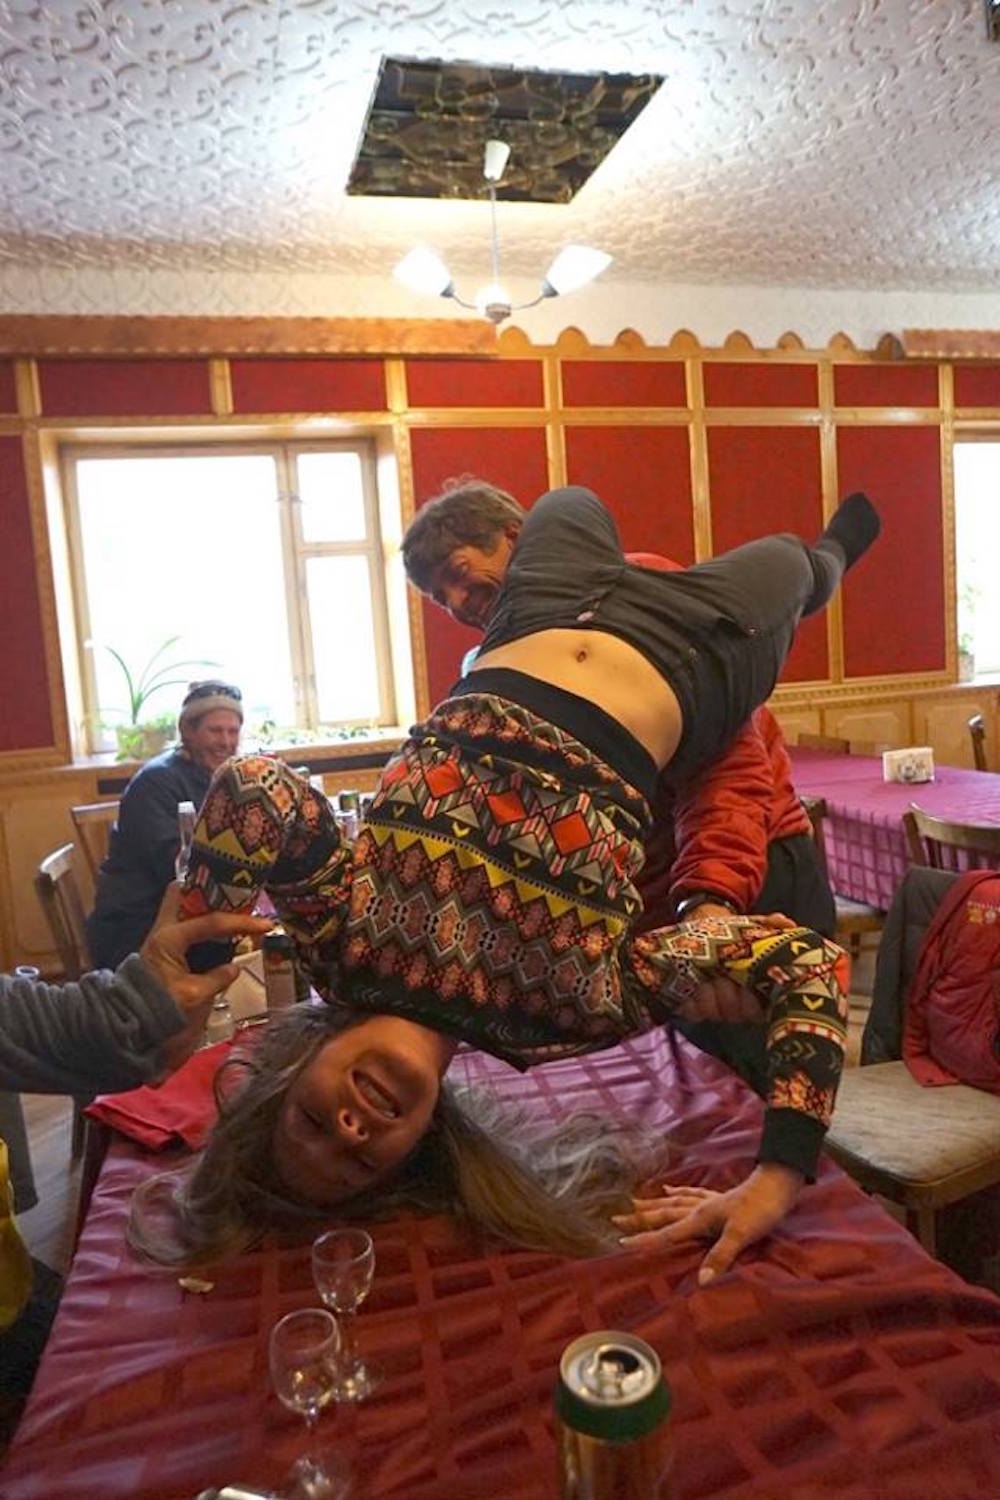 Yes, things got a little wild in Pyramiden... There may or may not have been spanking... photo: paul